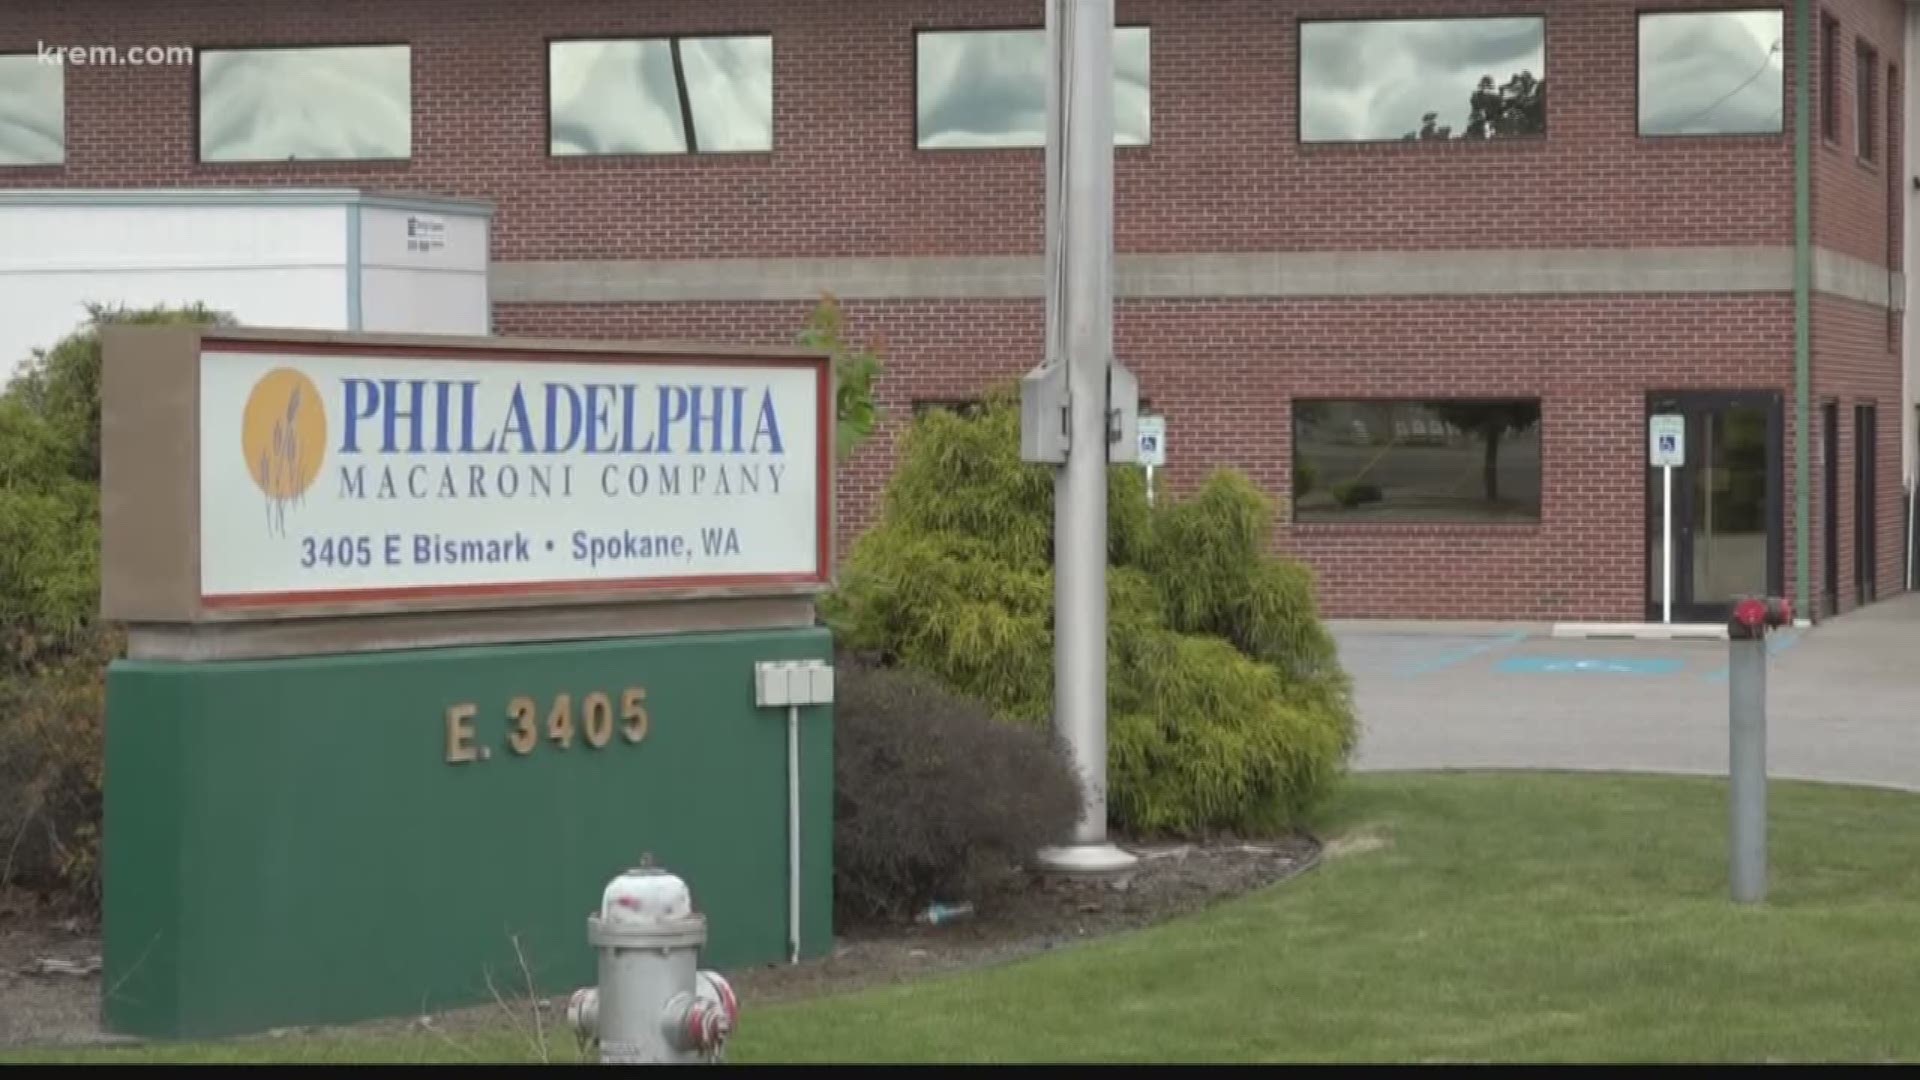 The coronavirus outbreak was among a specific group of people at the Philadelphia Macaroni Company and health officials aren't worried about community spread.